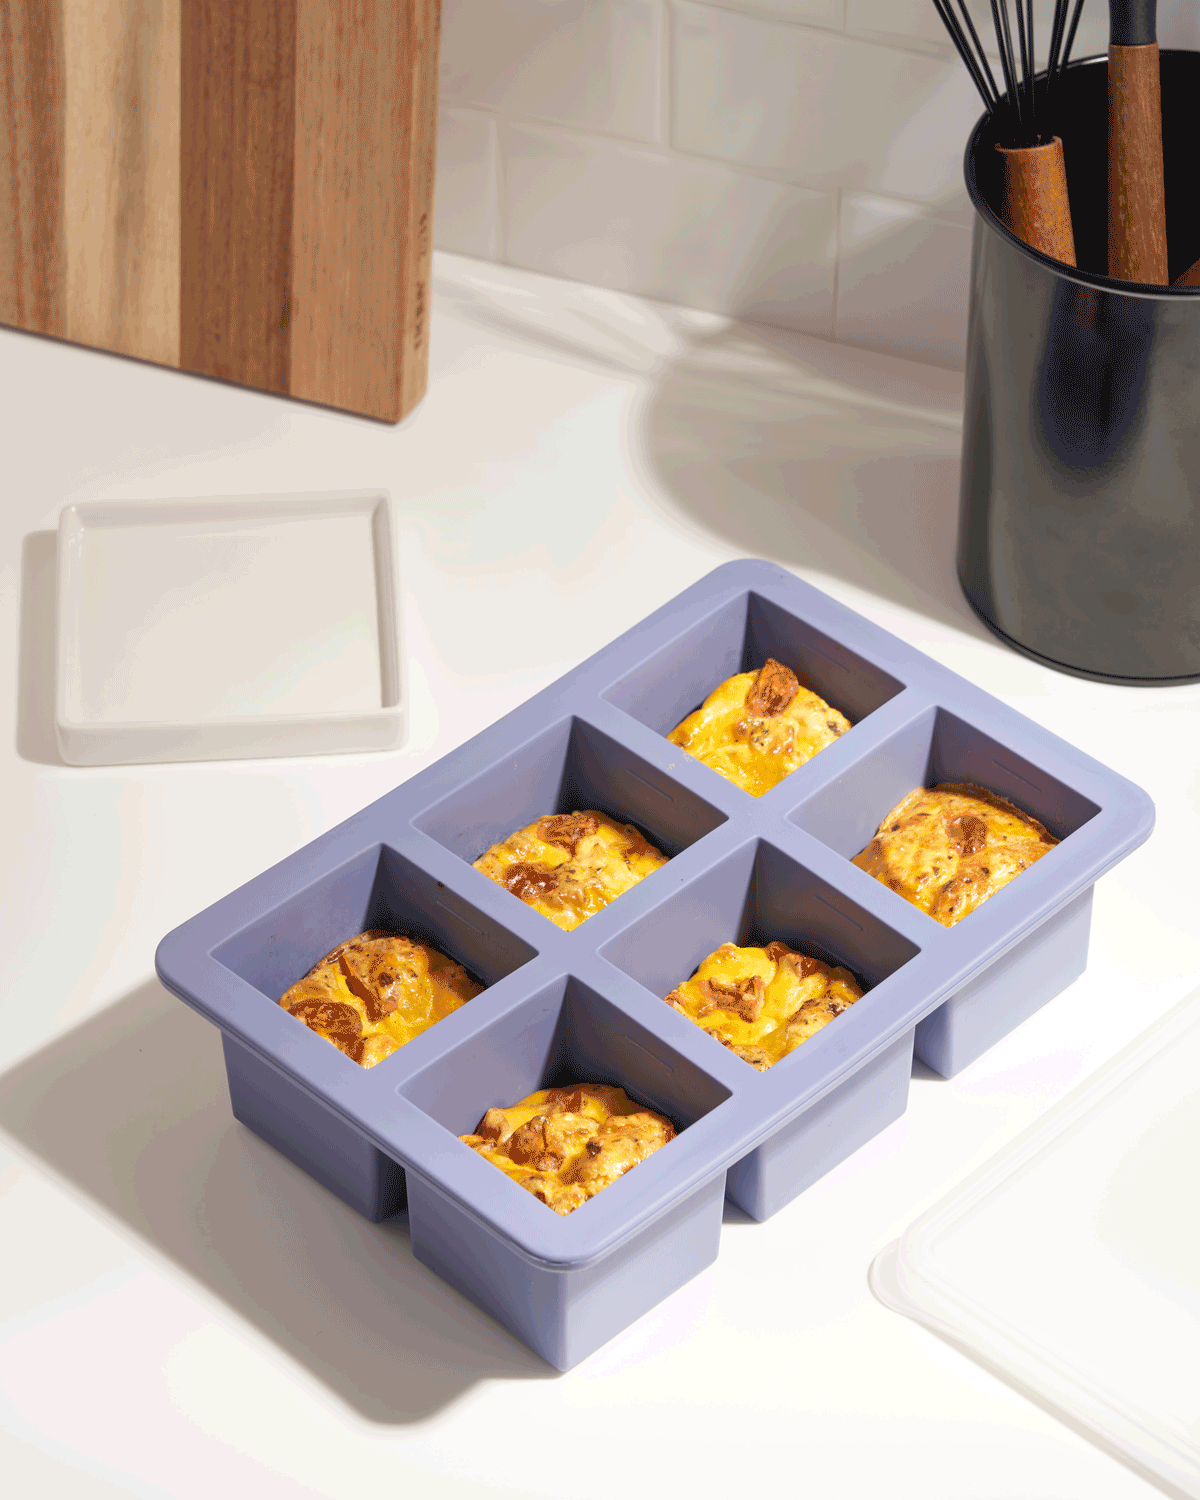 Walfos Silicone Soup Freezer Container, 1-Cup Soup Freezer Cube Tray with  Lid Prevents Freezer Odo, 3 Pcs Soup Freezer Molds, Perfect For Storing and